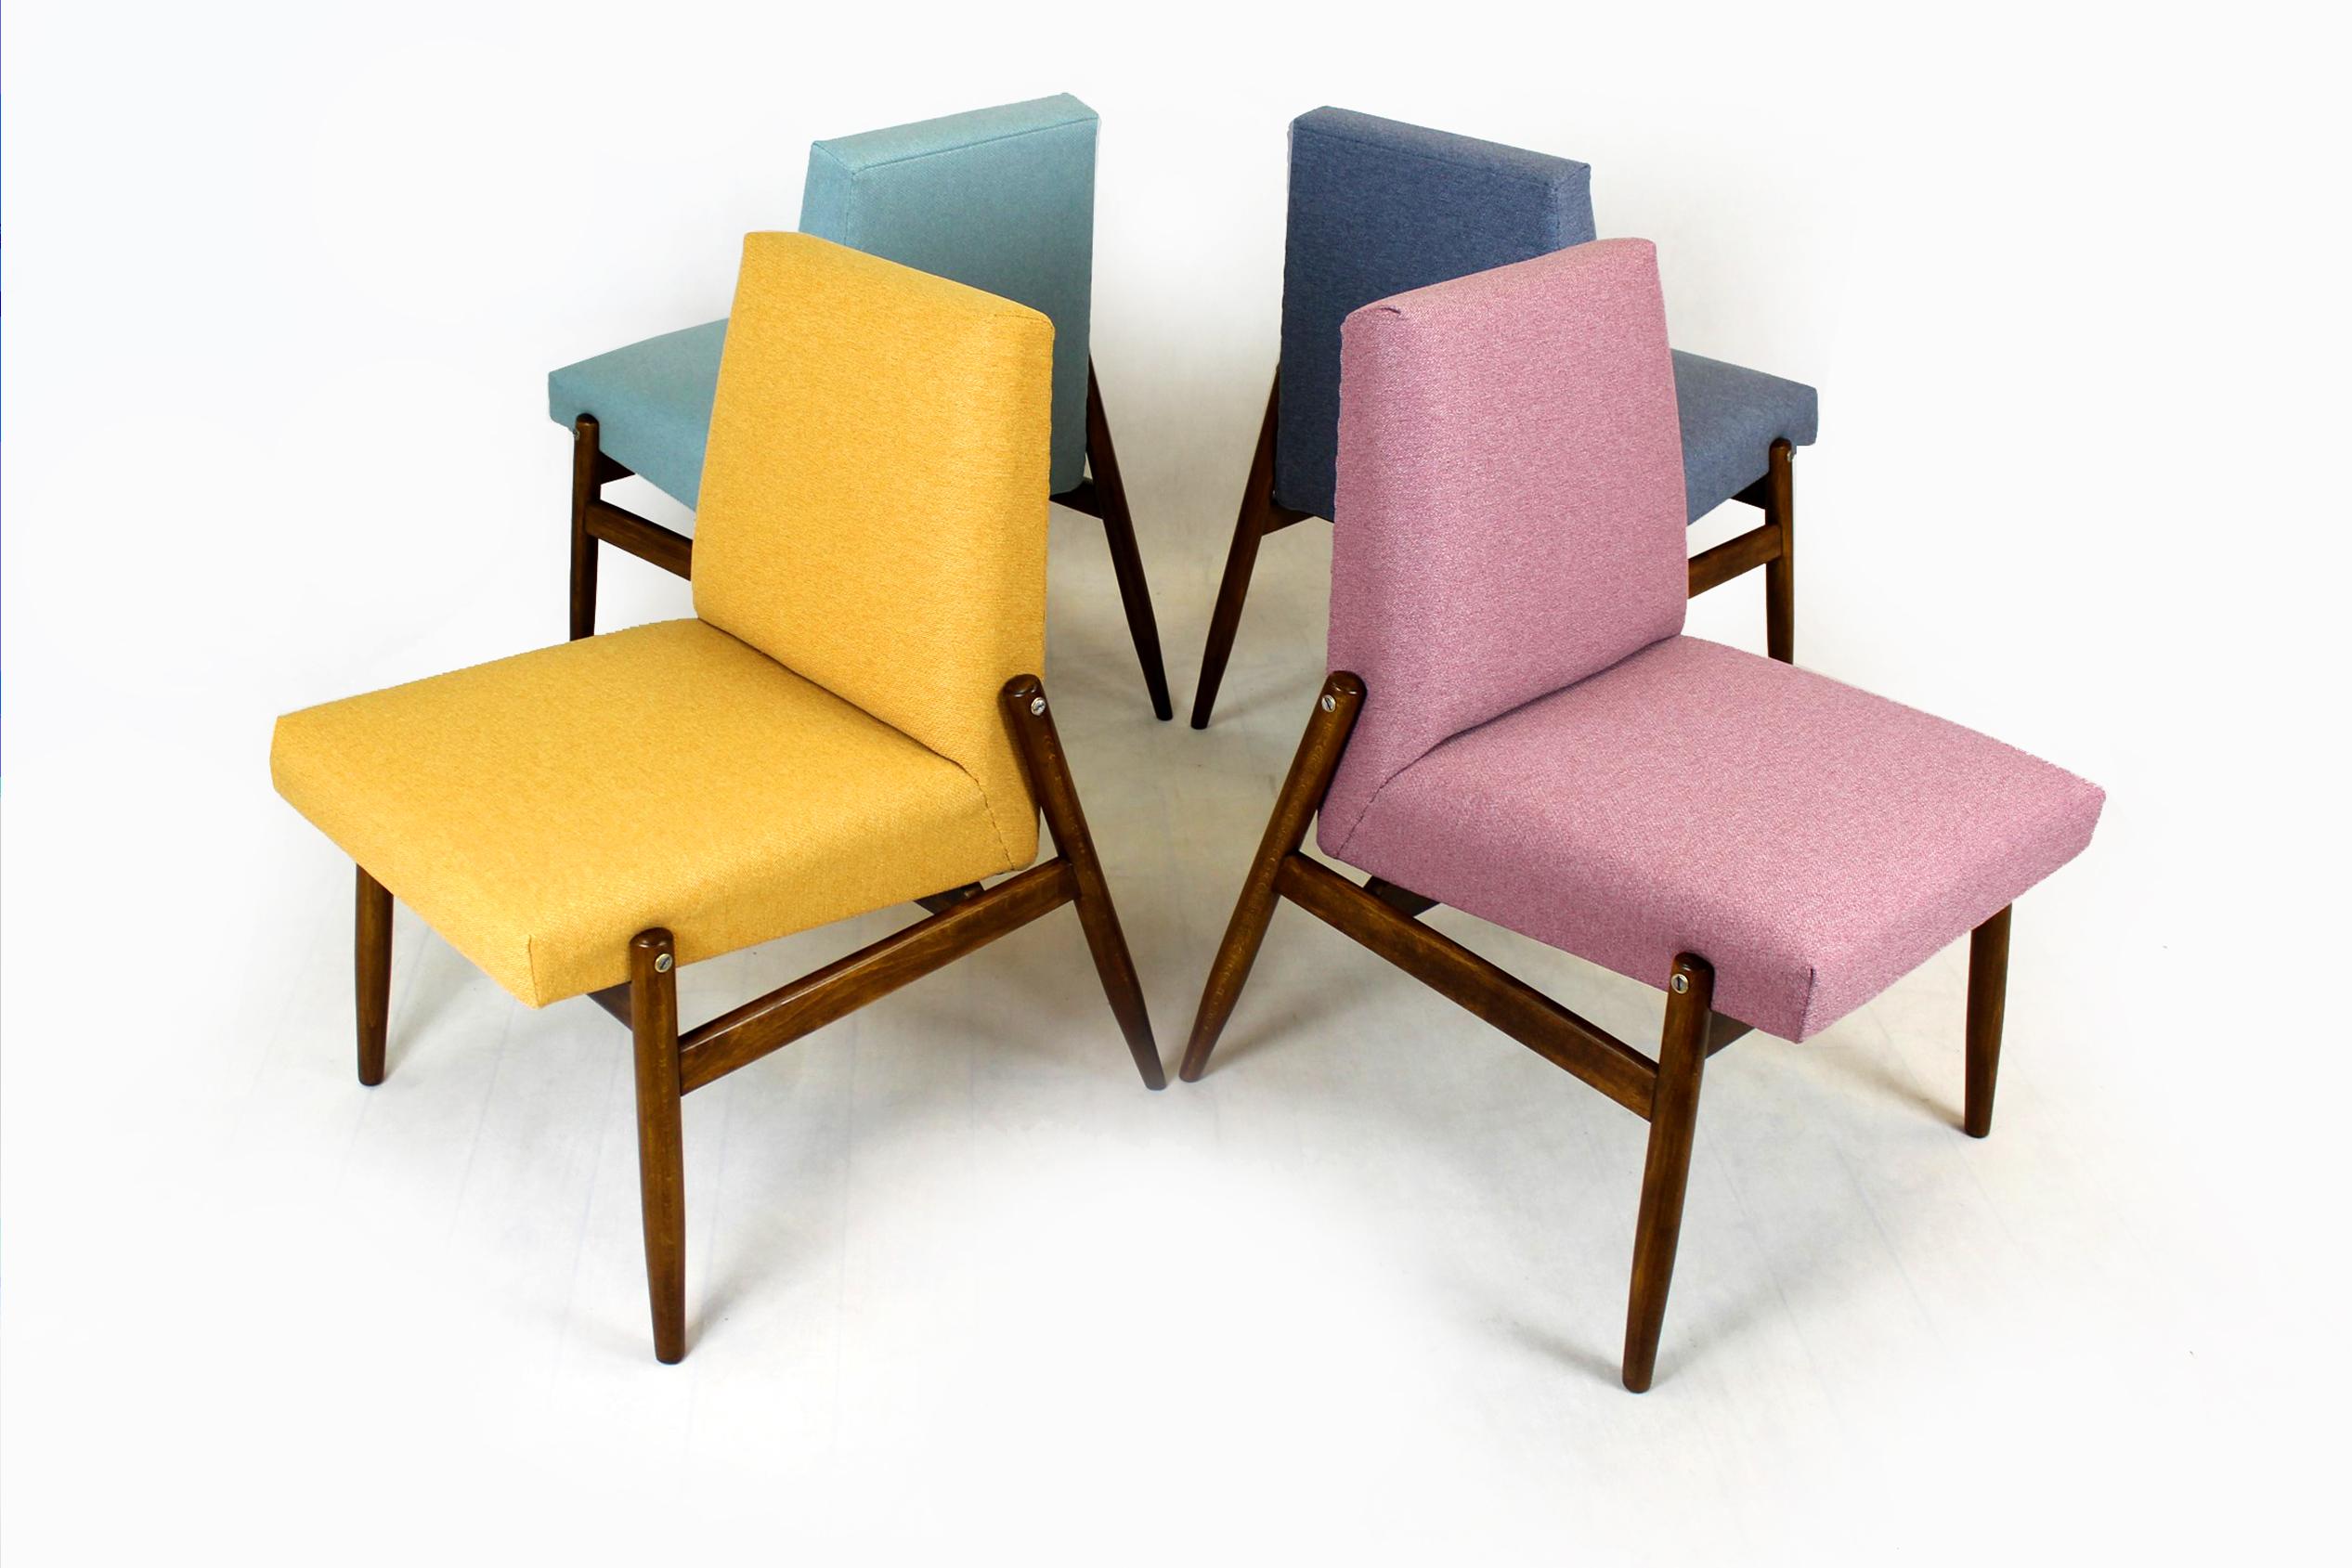 This set of four beech chairs was produced by Zamojskie Fabryki Mebli in the 1960s in Poland. 
The chairs have been restored - lacquered, satin finished wood, new foams upholstered with an easy-to-clean fabric.